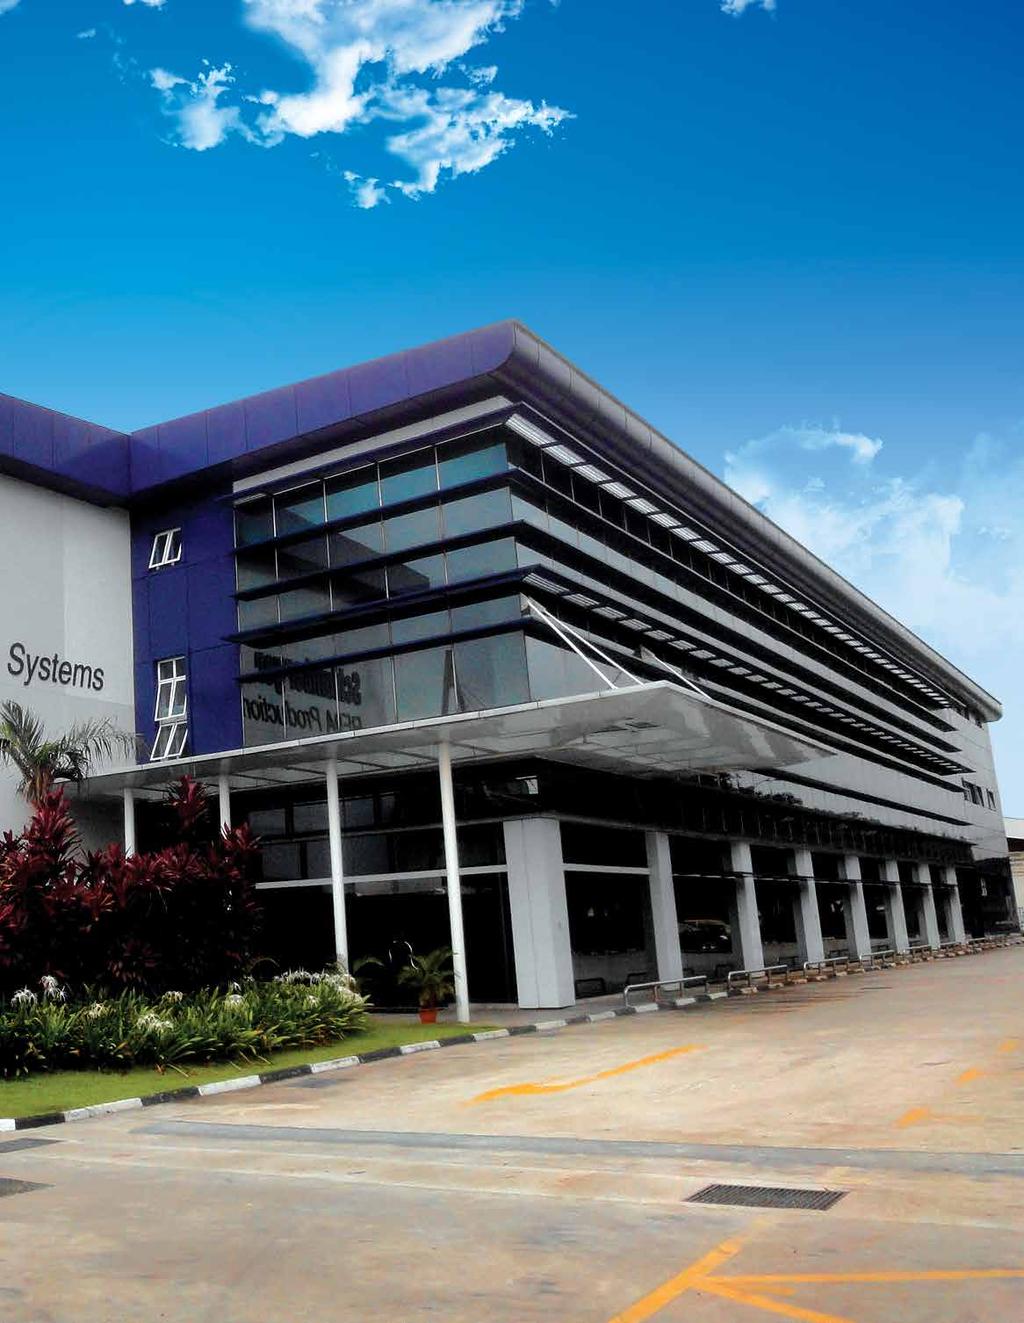 The Singapore Integration Center serves as the artificial lift headquarters for Schlumberger.